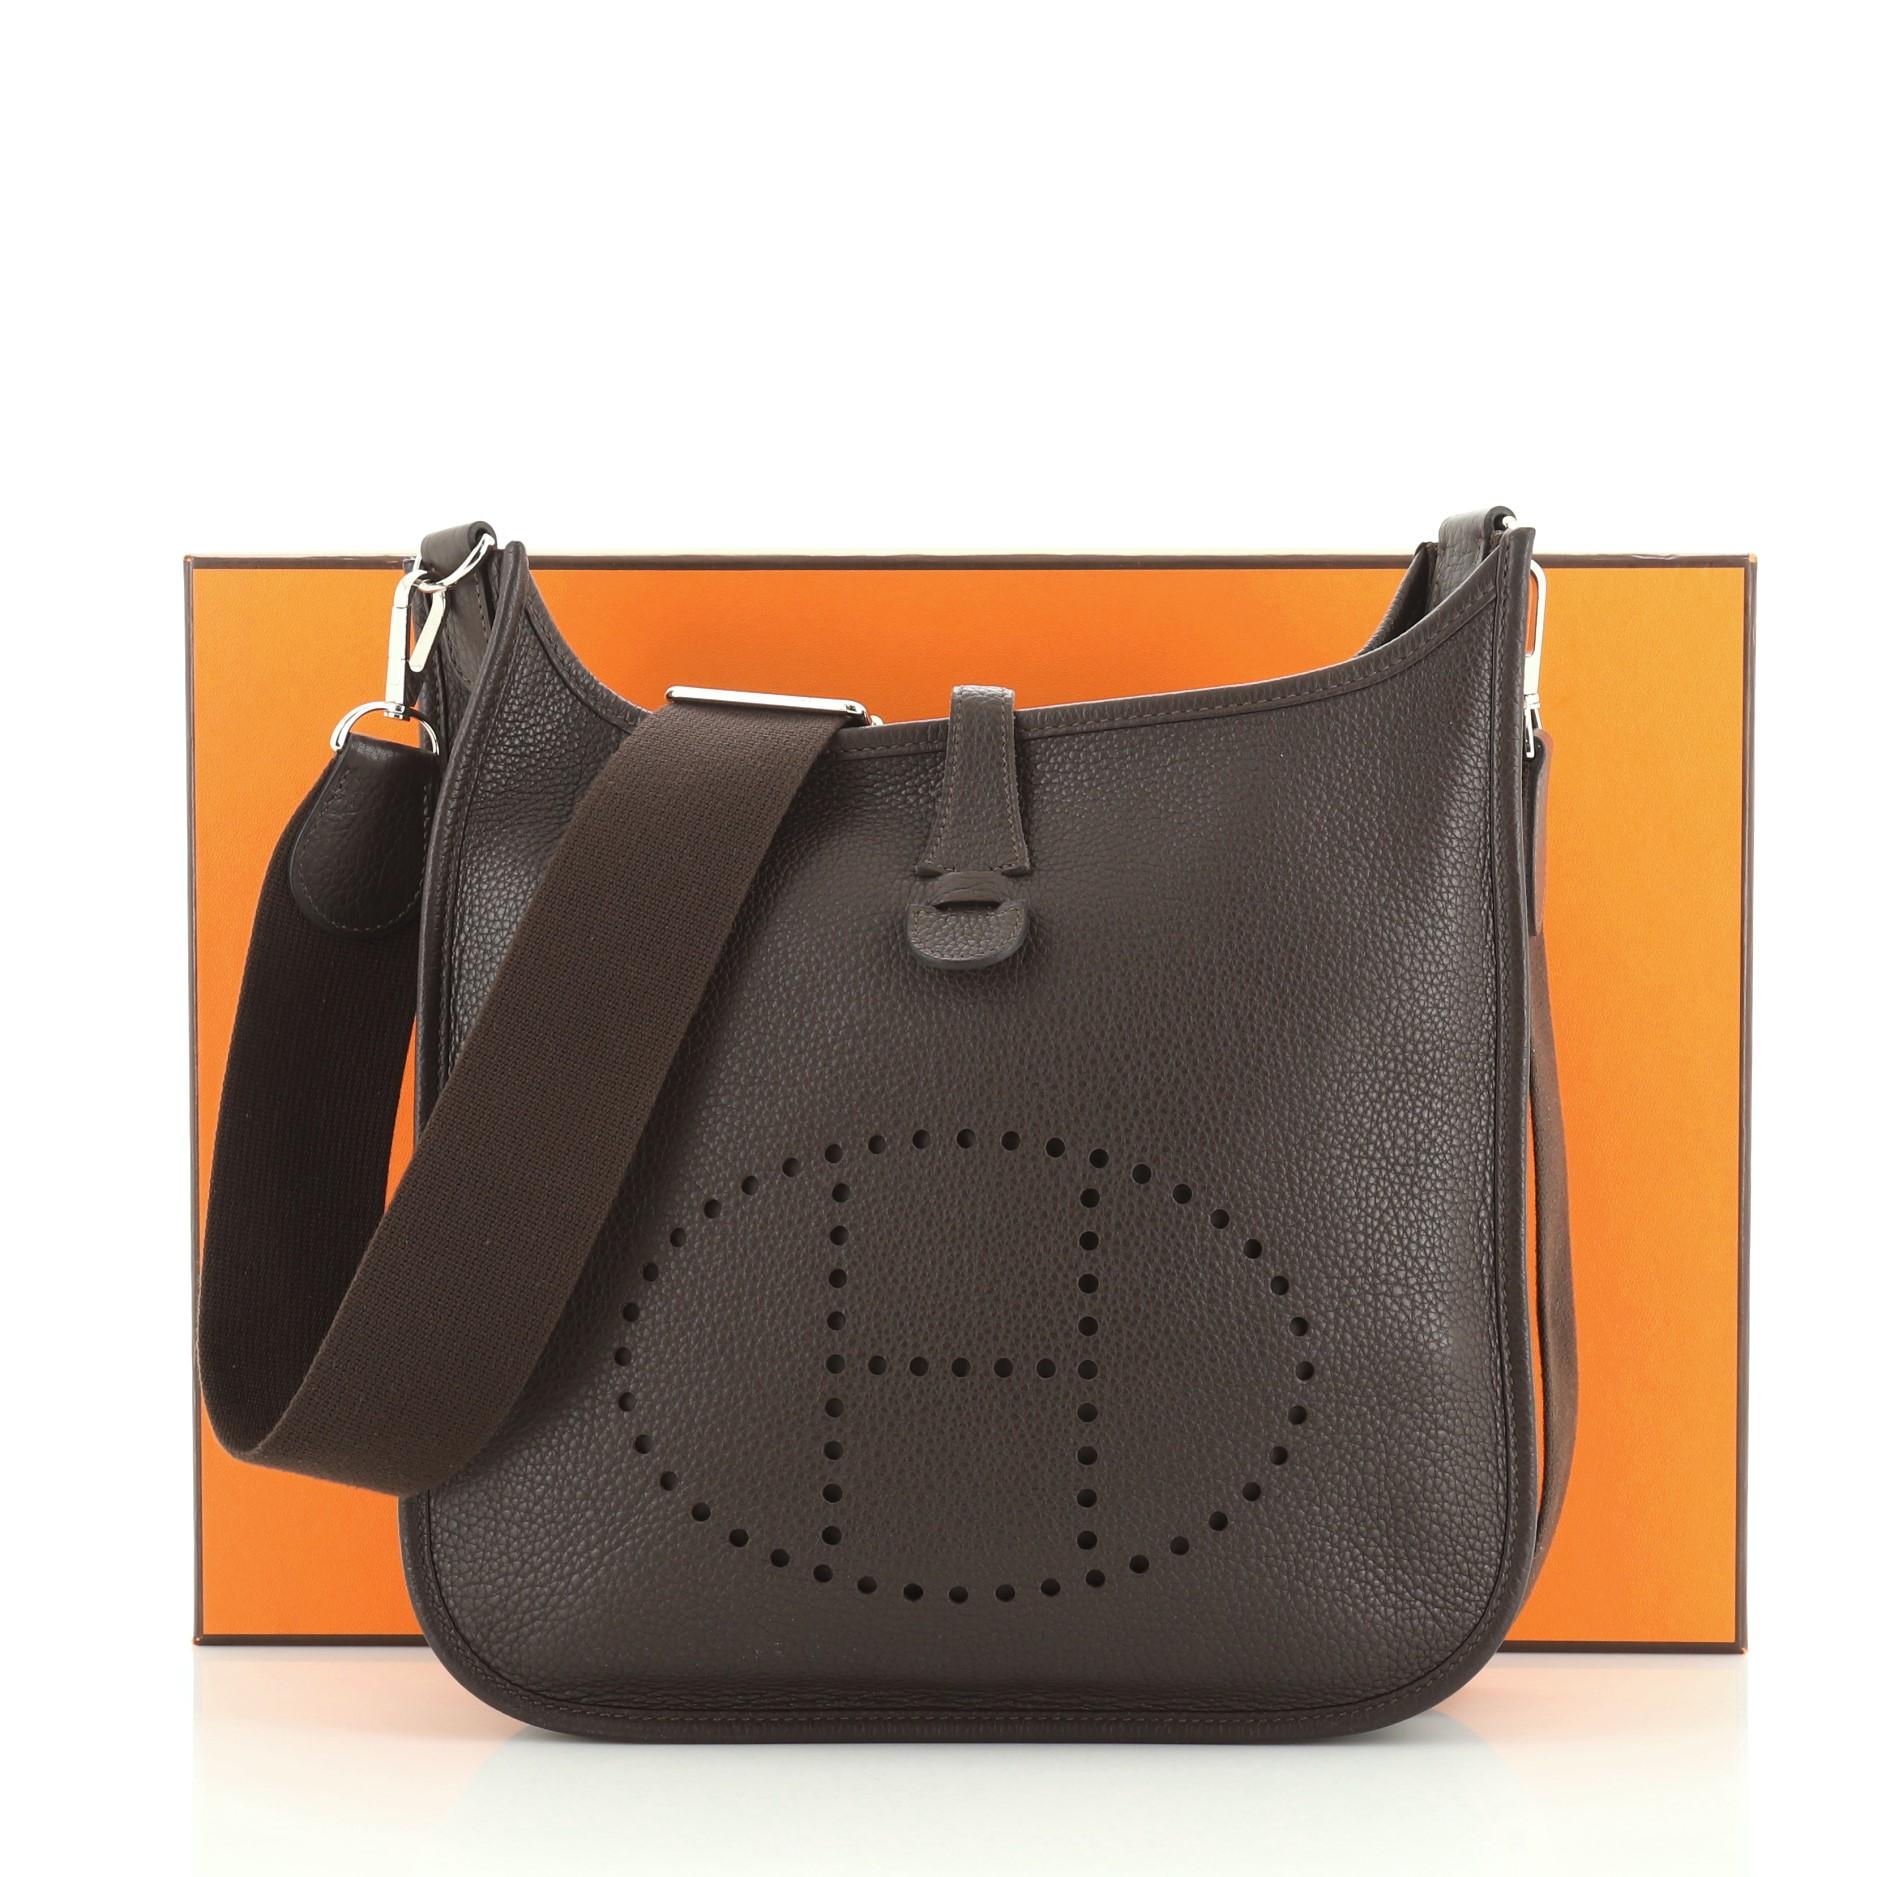 This Hermes Evelyne Crossbody Gen III Clemence PM, crafted in Ebene brown Clemence leather, features perforated H design at the front, accessible back pocket, adjustable textile shoulder strap, and palladium hardware. It opens to an Ebene brown raw